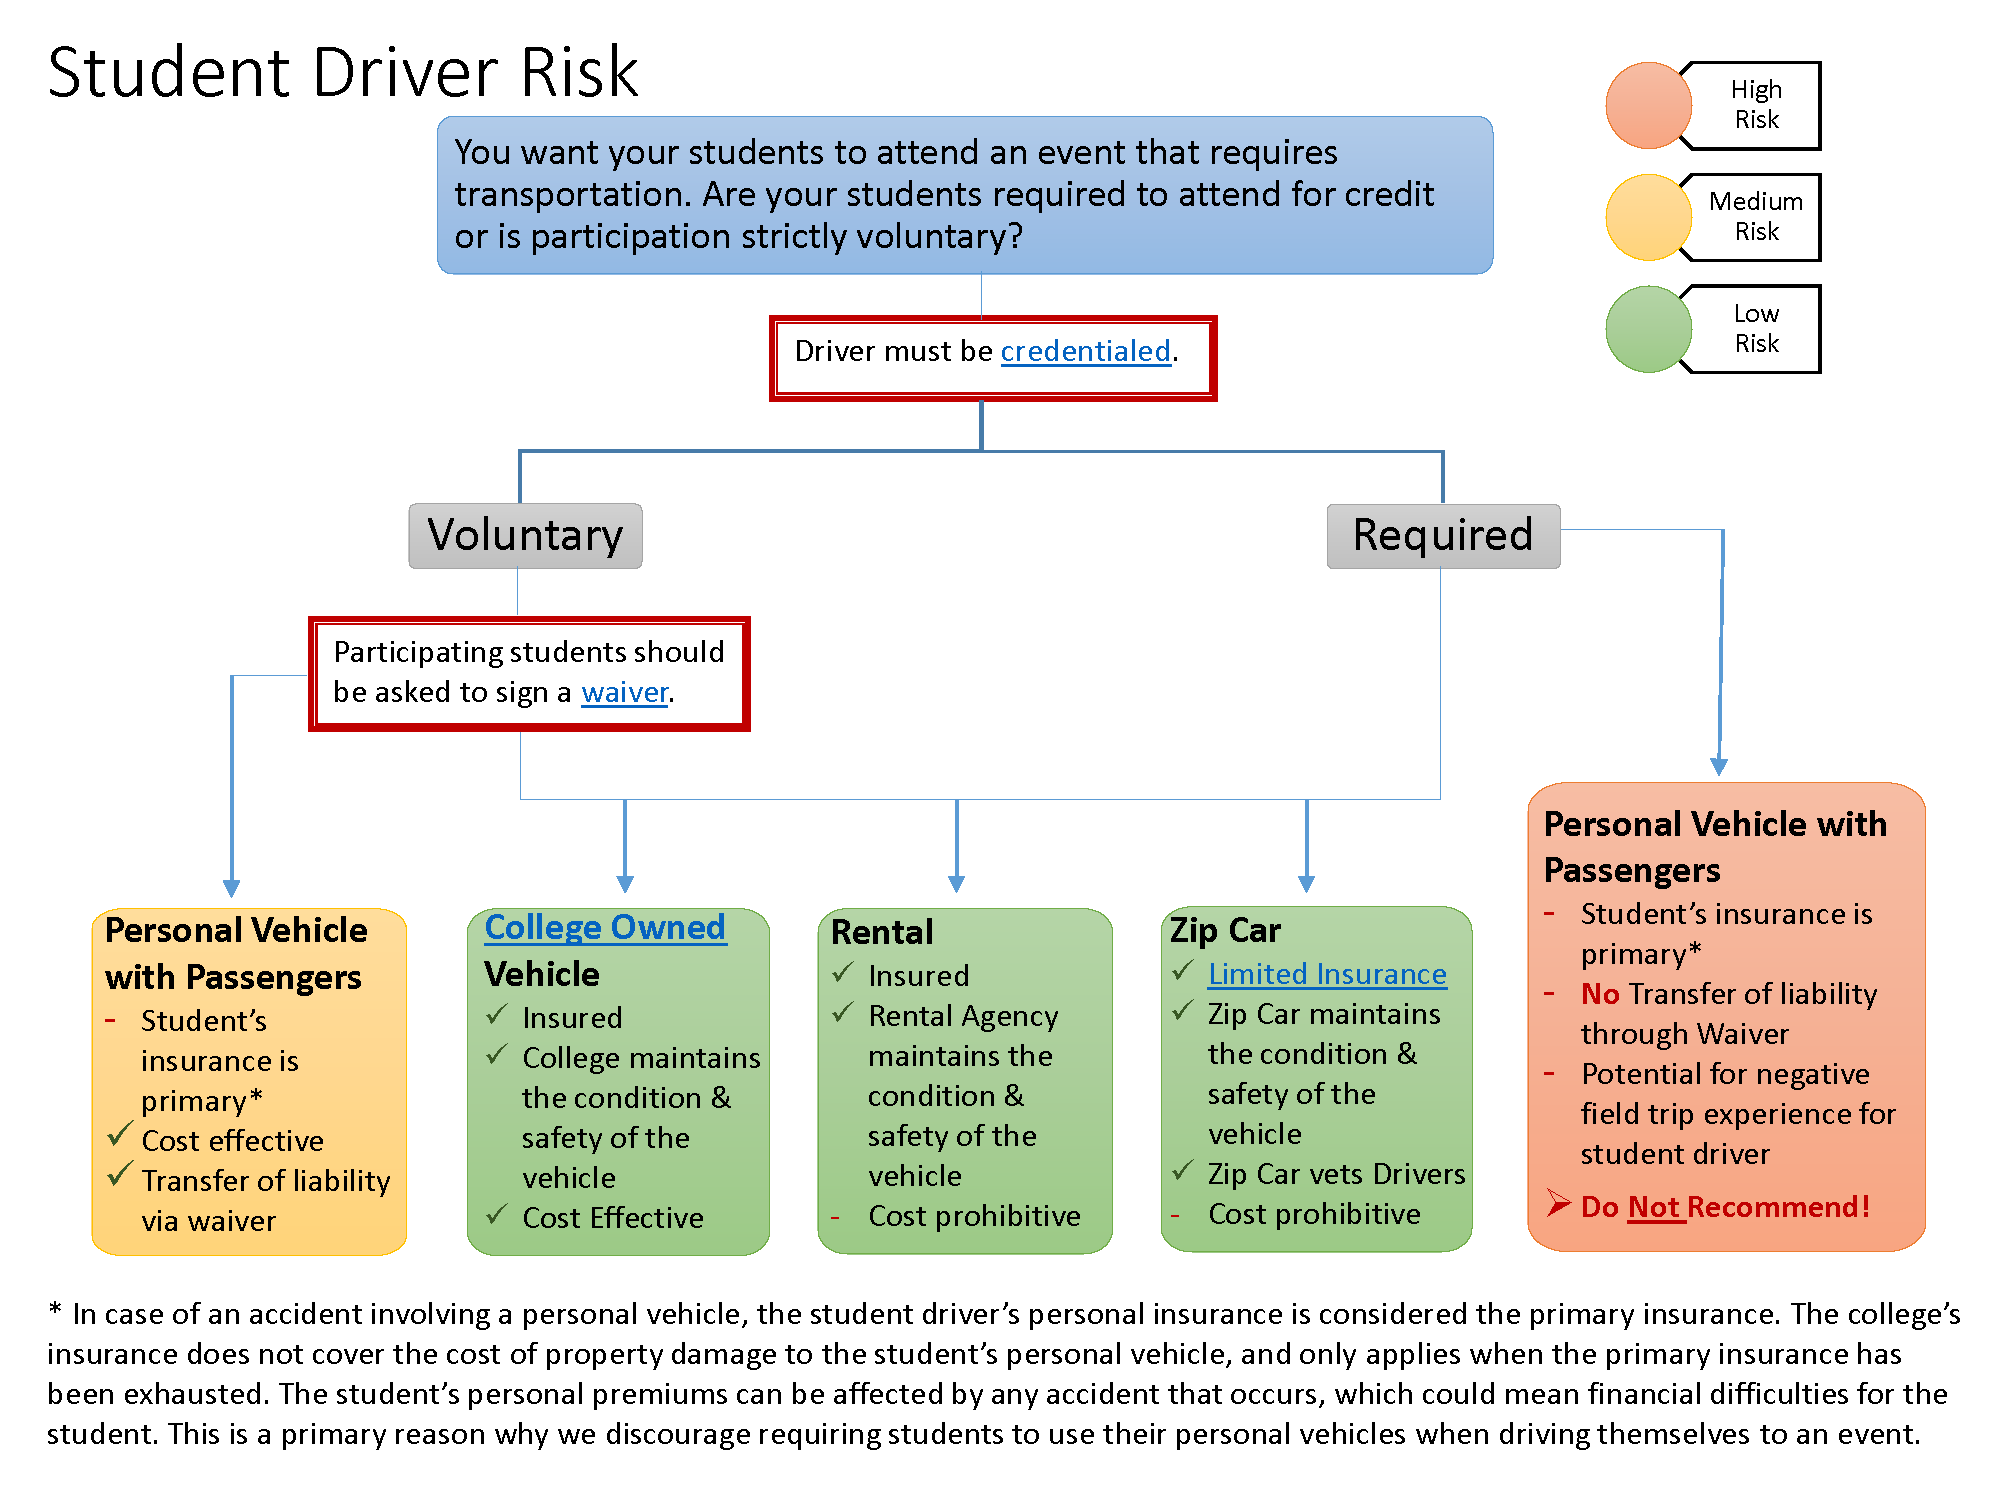 For screen-readable version of this Student Driver Risk Flowchart, download pdf.